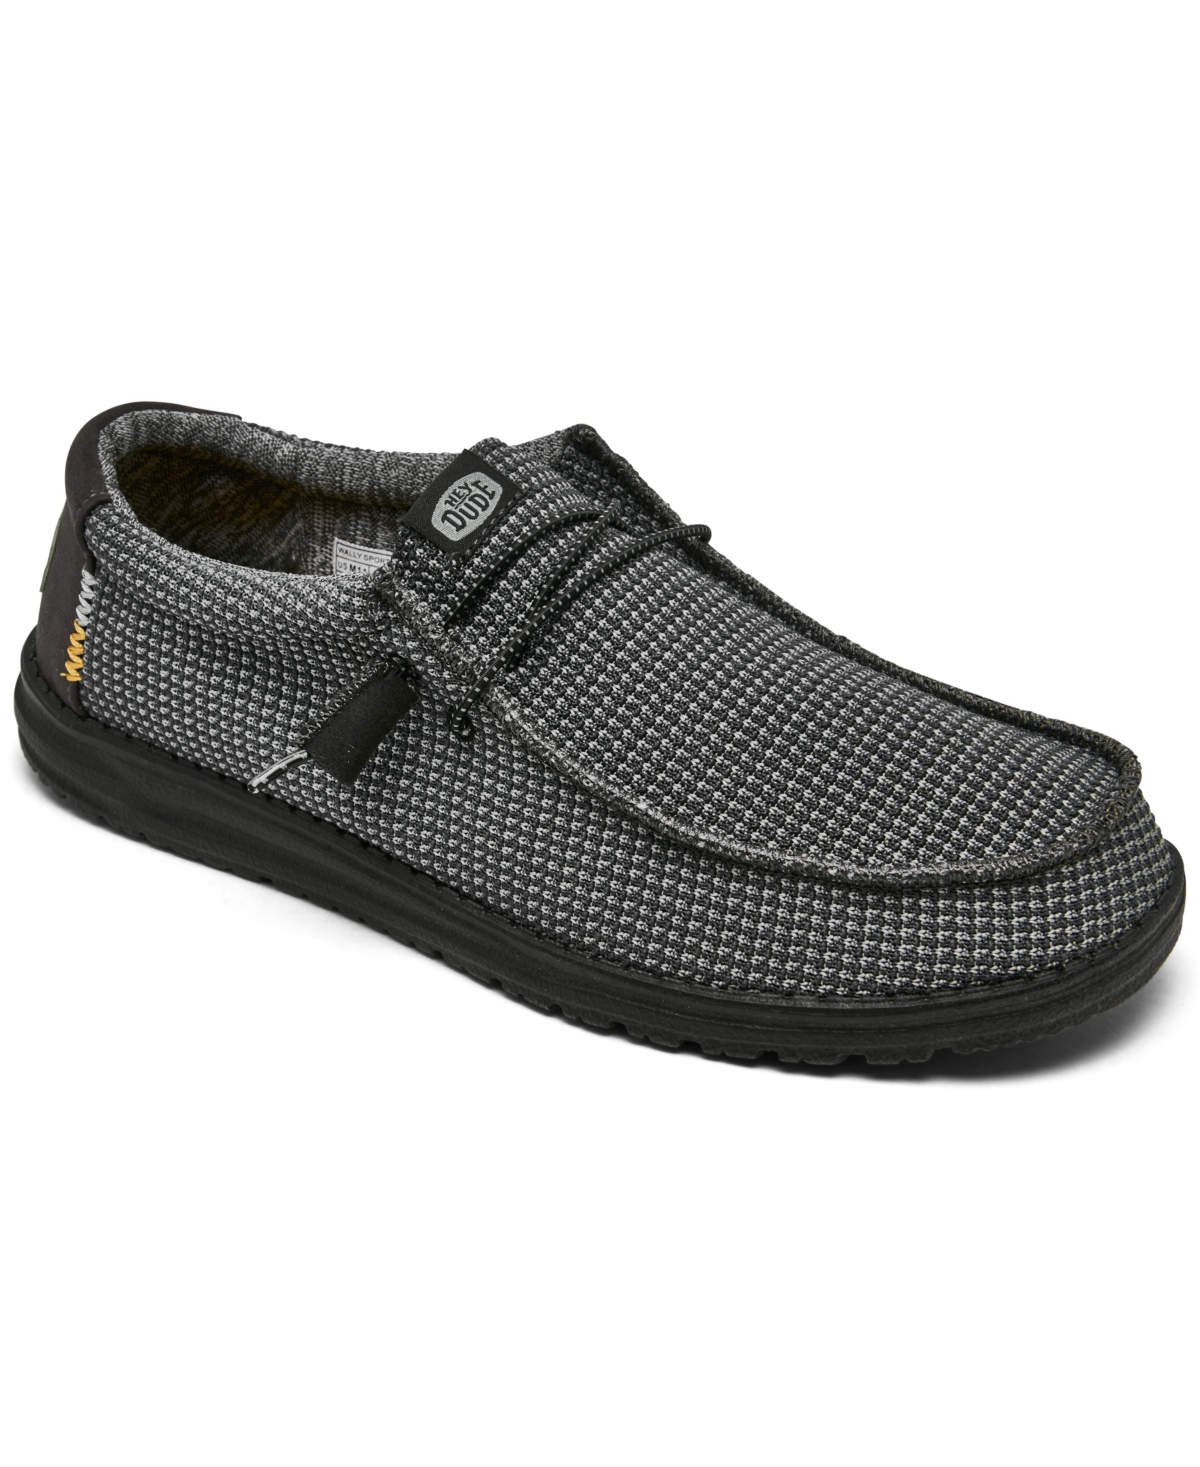 Men's Wally Sport Mesh Casual Moccasin Sneakers from Finish Line - Charcoal